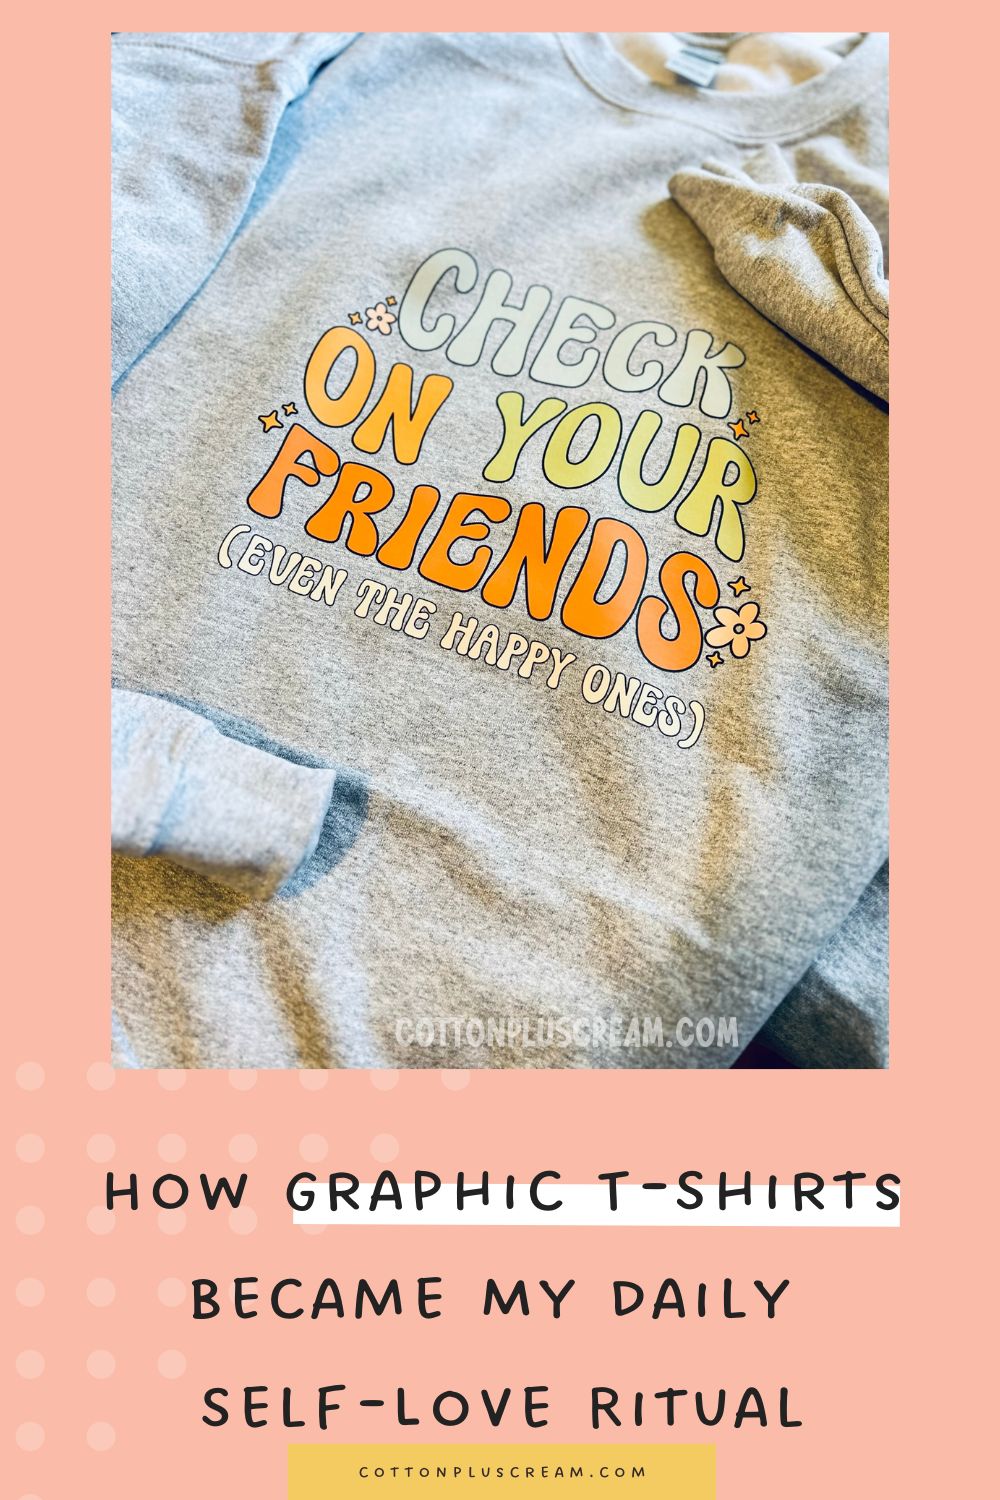 Embracing Empowerment: How Graphic T-Shirts Became My Daily Self-Love Ritual - Cotton Plus Cream